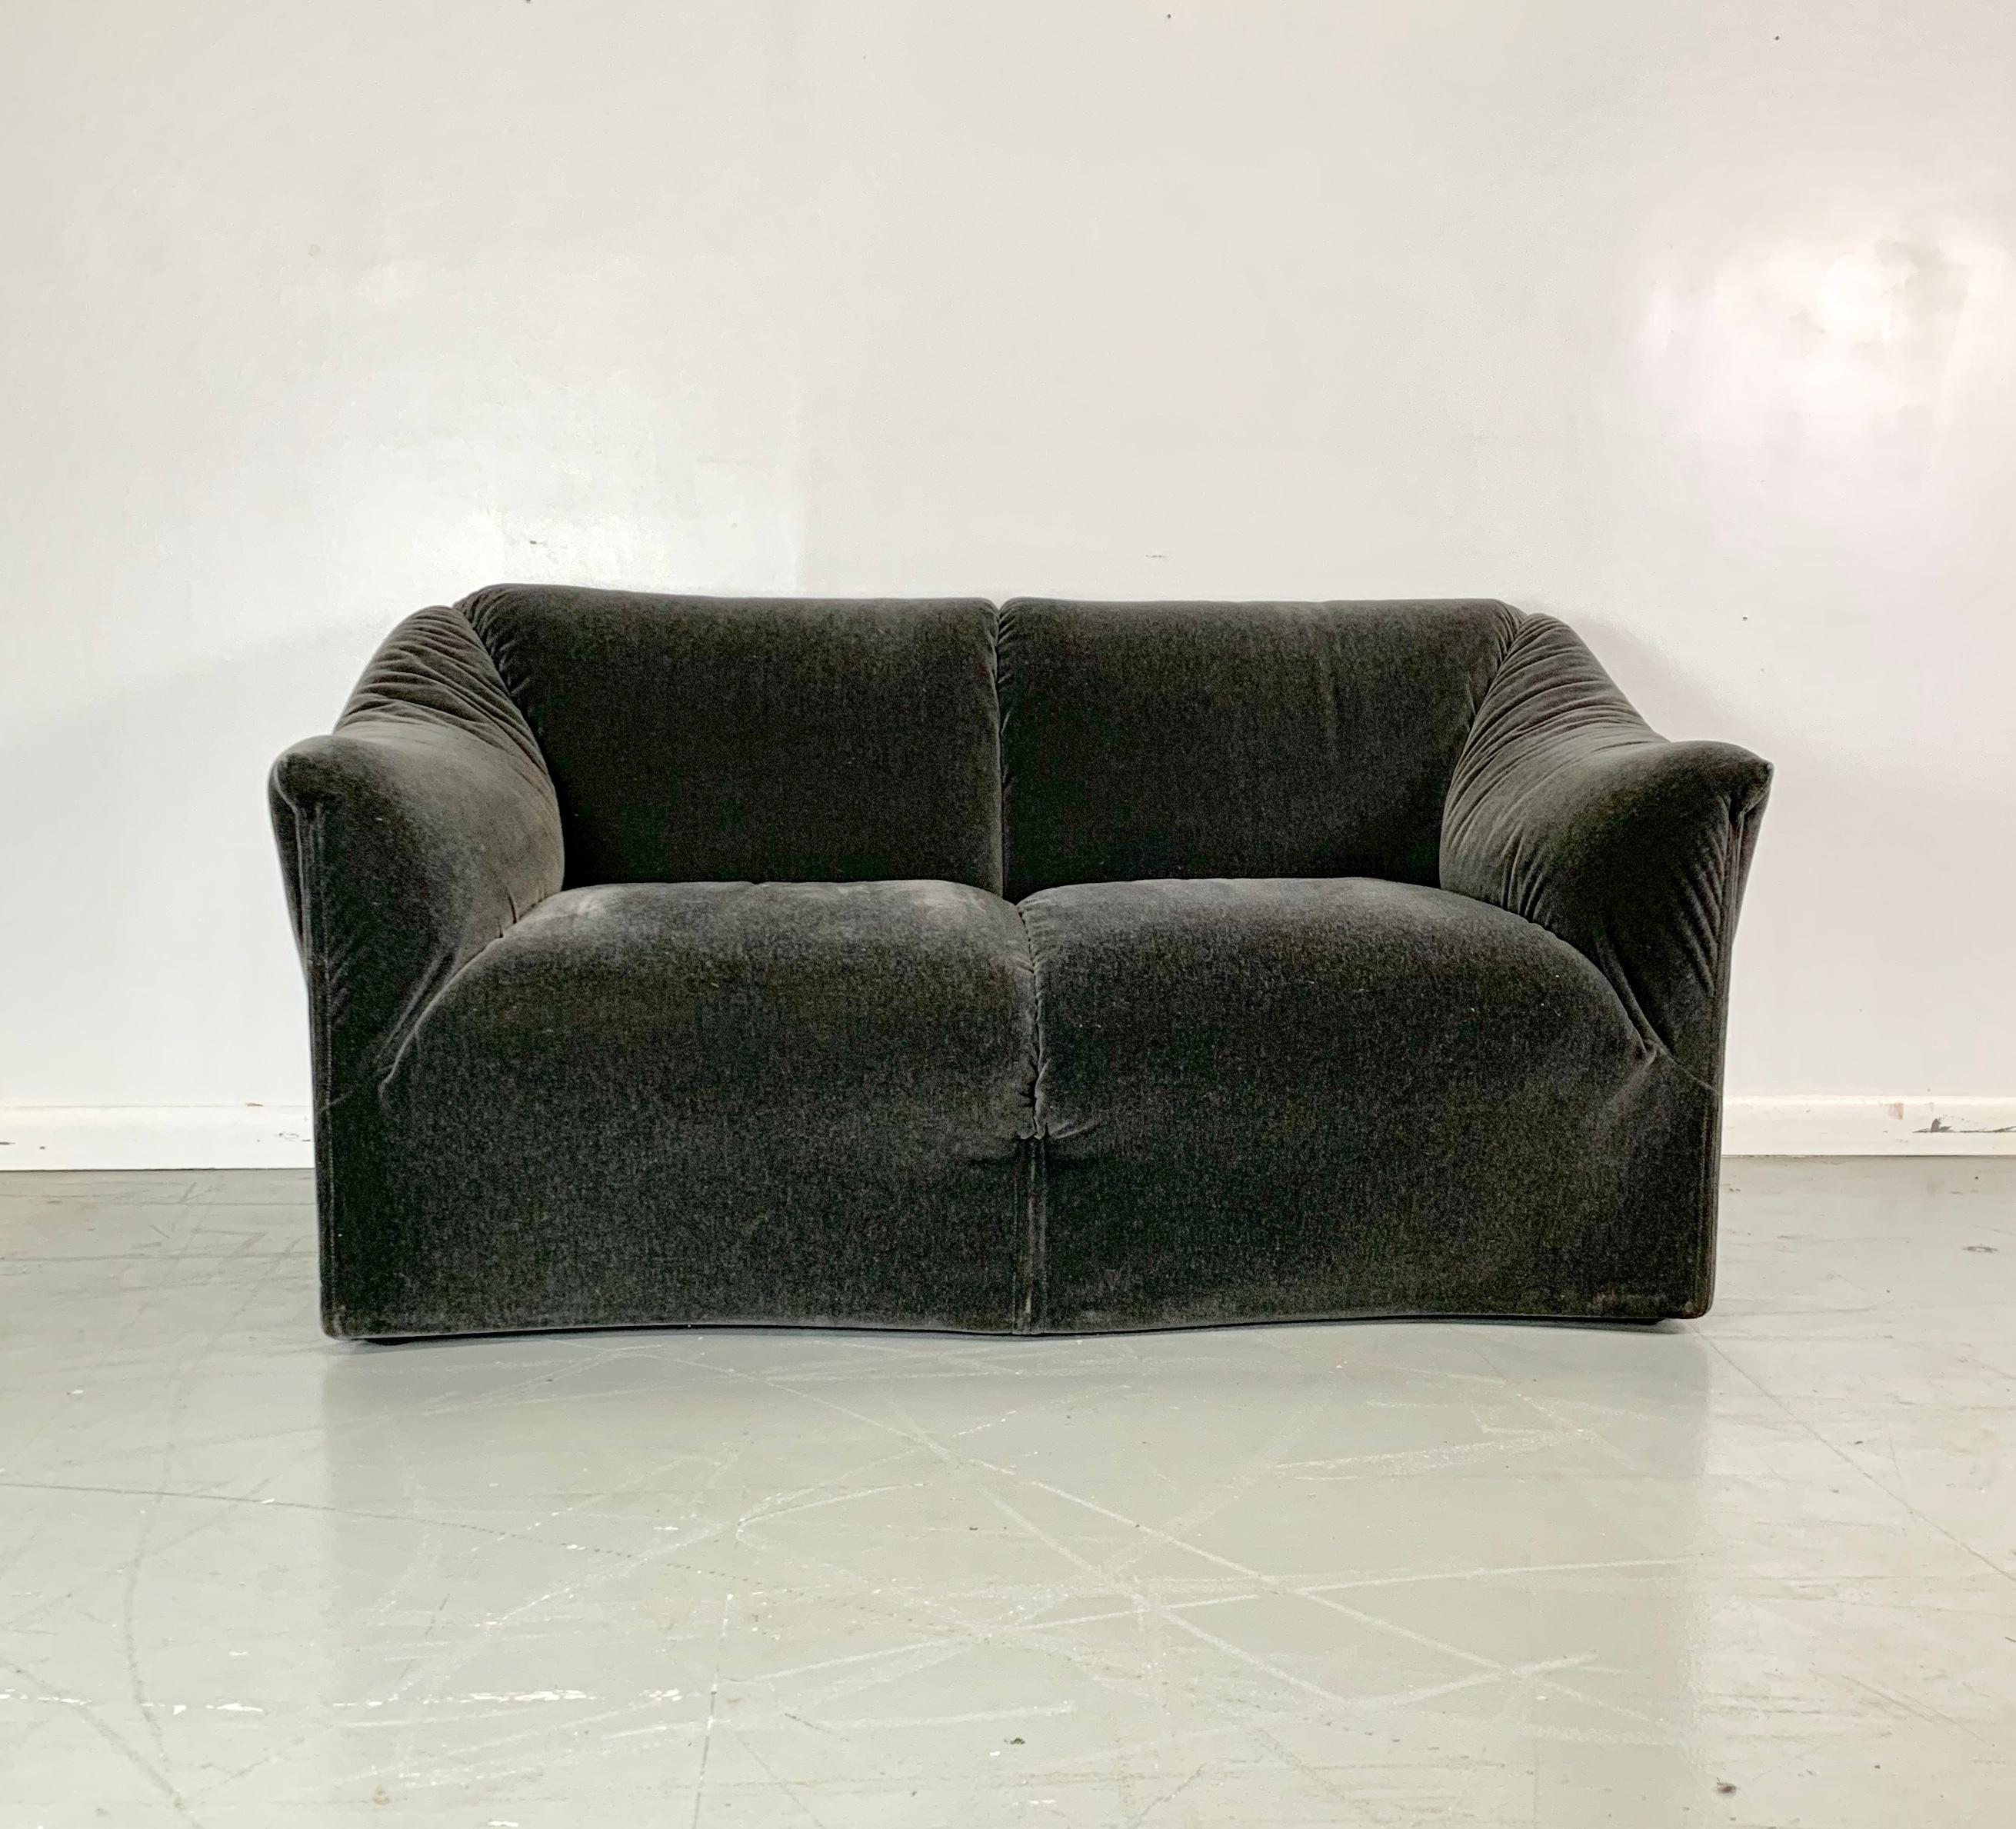 Designed in the early 1970s, the Tentazione loveseat is considered model #685 by Cassina and was distributed by Atelier International Limited (ai), and has similar styling as the La Bambole sofa. Constructed by a metal frame on a wooden base and